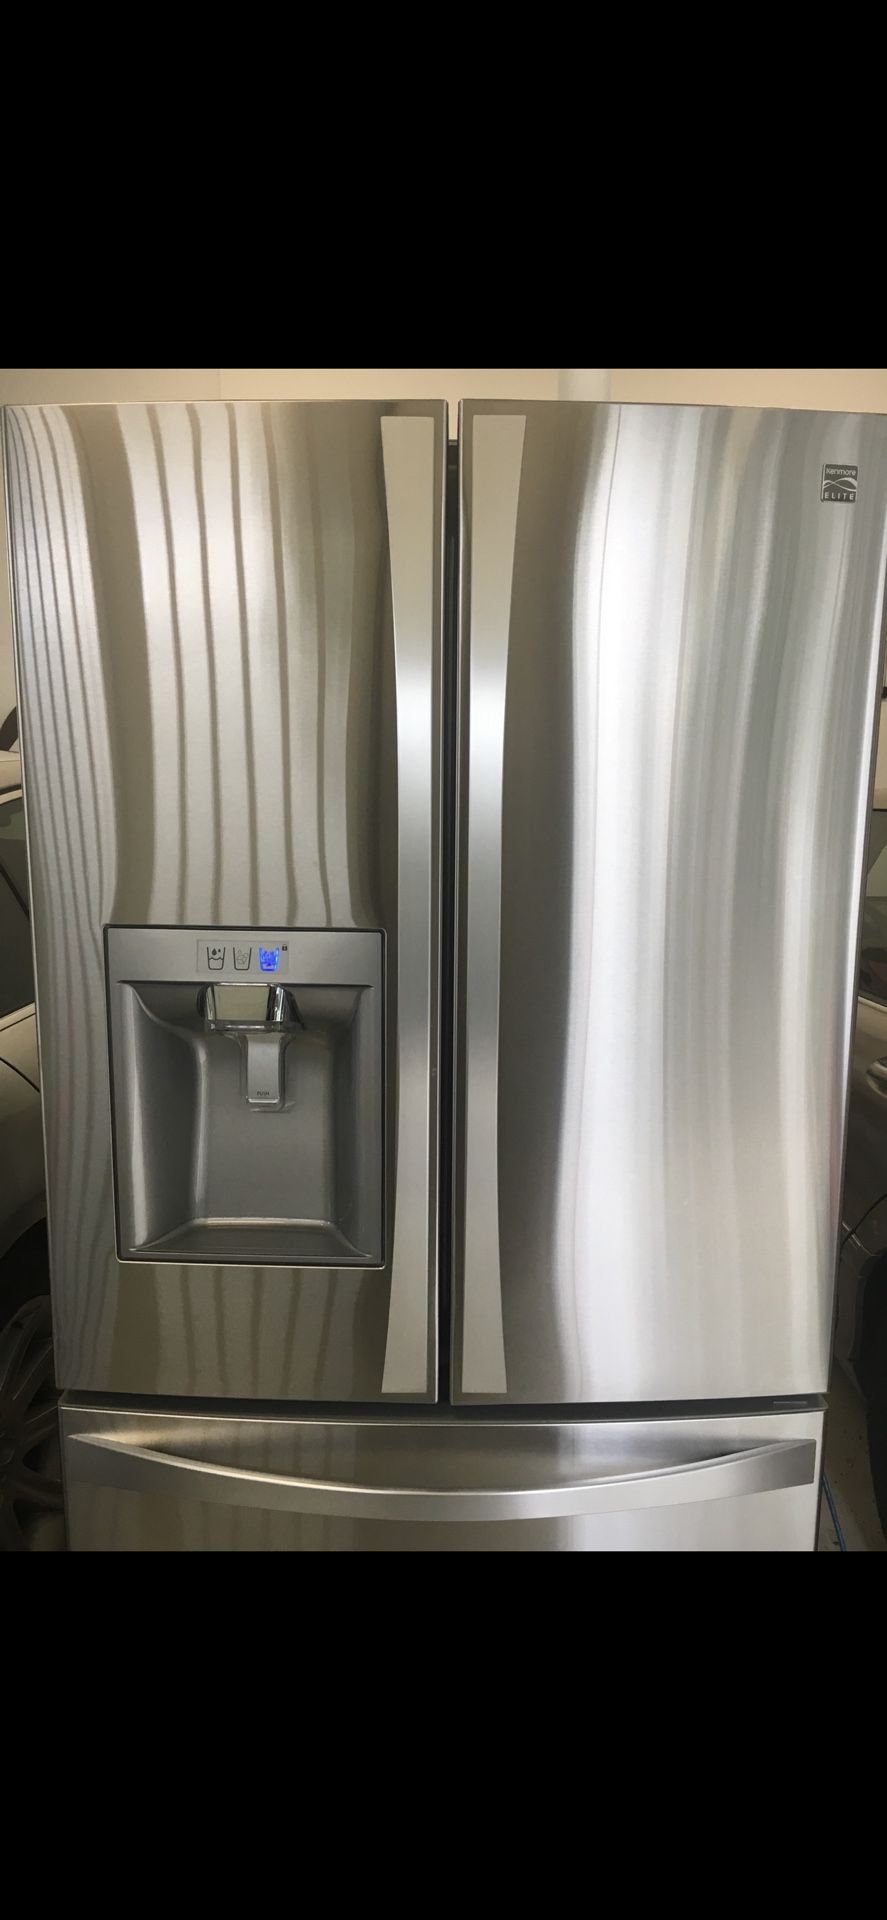 Almost New Kenmore Elite, French Door, Counter Depth Refrigerator. Model 795.74043.41. Need to sell this weekend